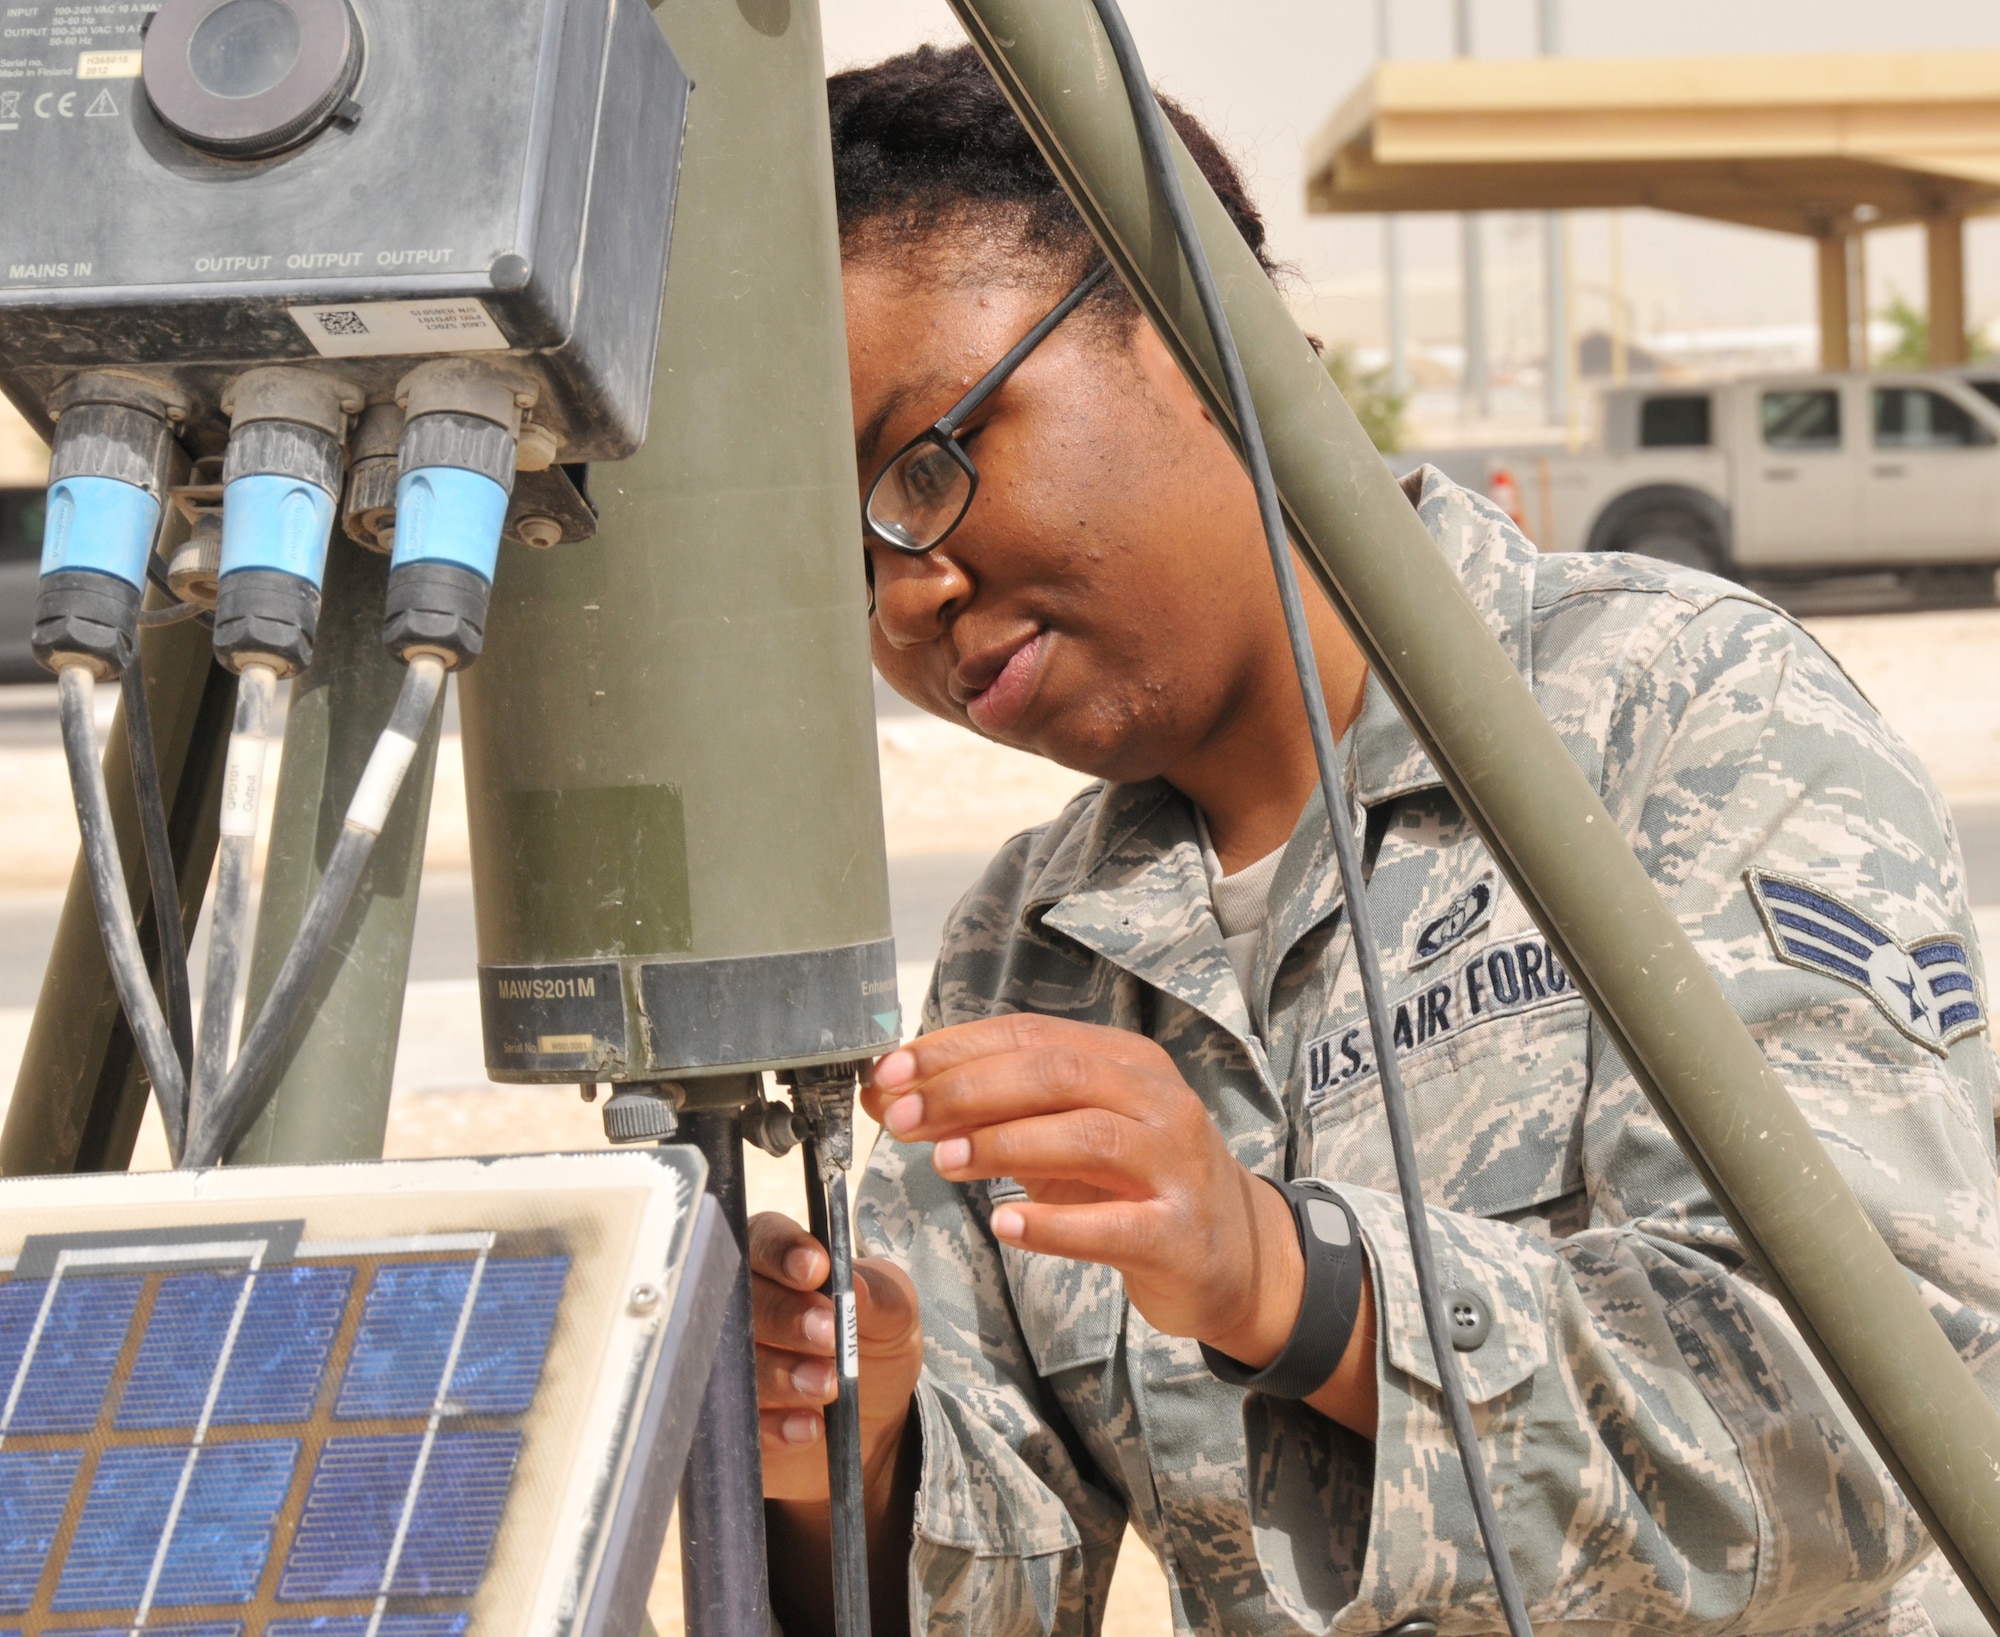 Senior Airman Tania Johnson-Hester, 379th Expeditionary Operations Support Squadron weather forecaster, deployed from Laughlin Air Force Base, Texas, checks the Tactical Meteorological Observing System connections March 17 at Al Udeid Air Base, Qatar. Johnson-Hester uses the TMOS to collect temperature, dew point, humidity and pressure data. (U.S. Air Force photo by Tech. Sgt. Terrica Y. Jones/Released)